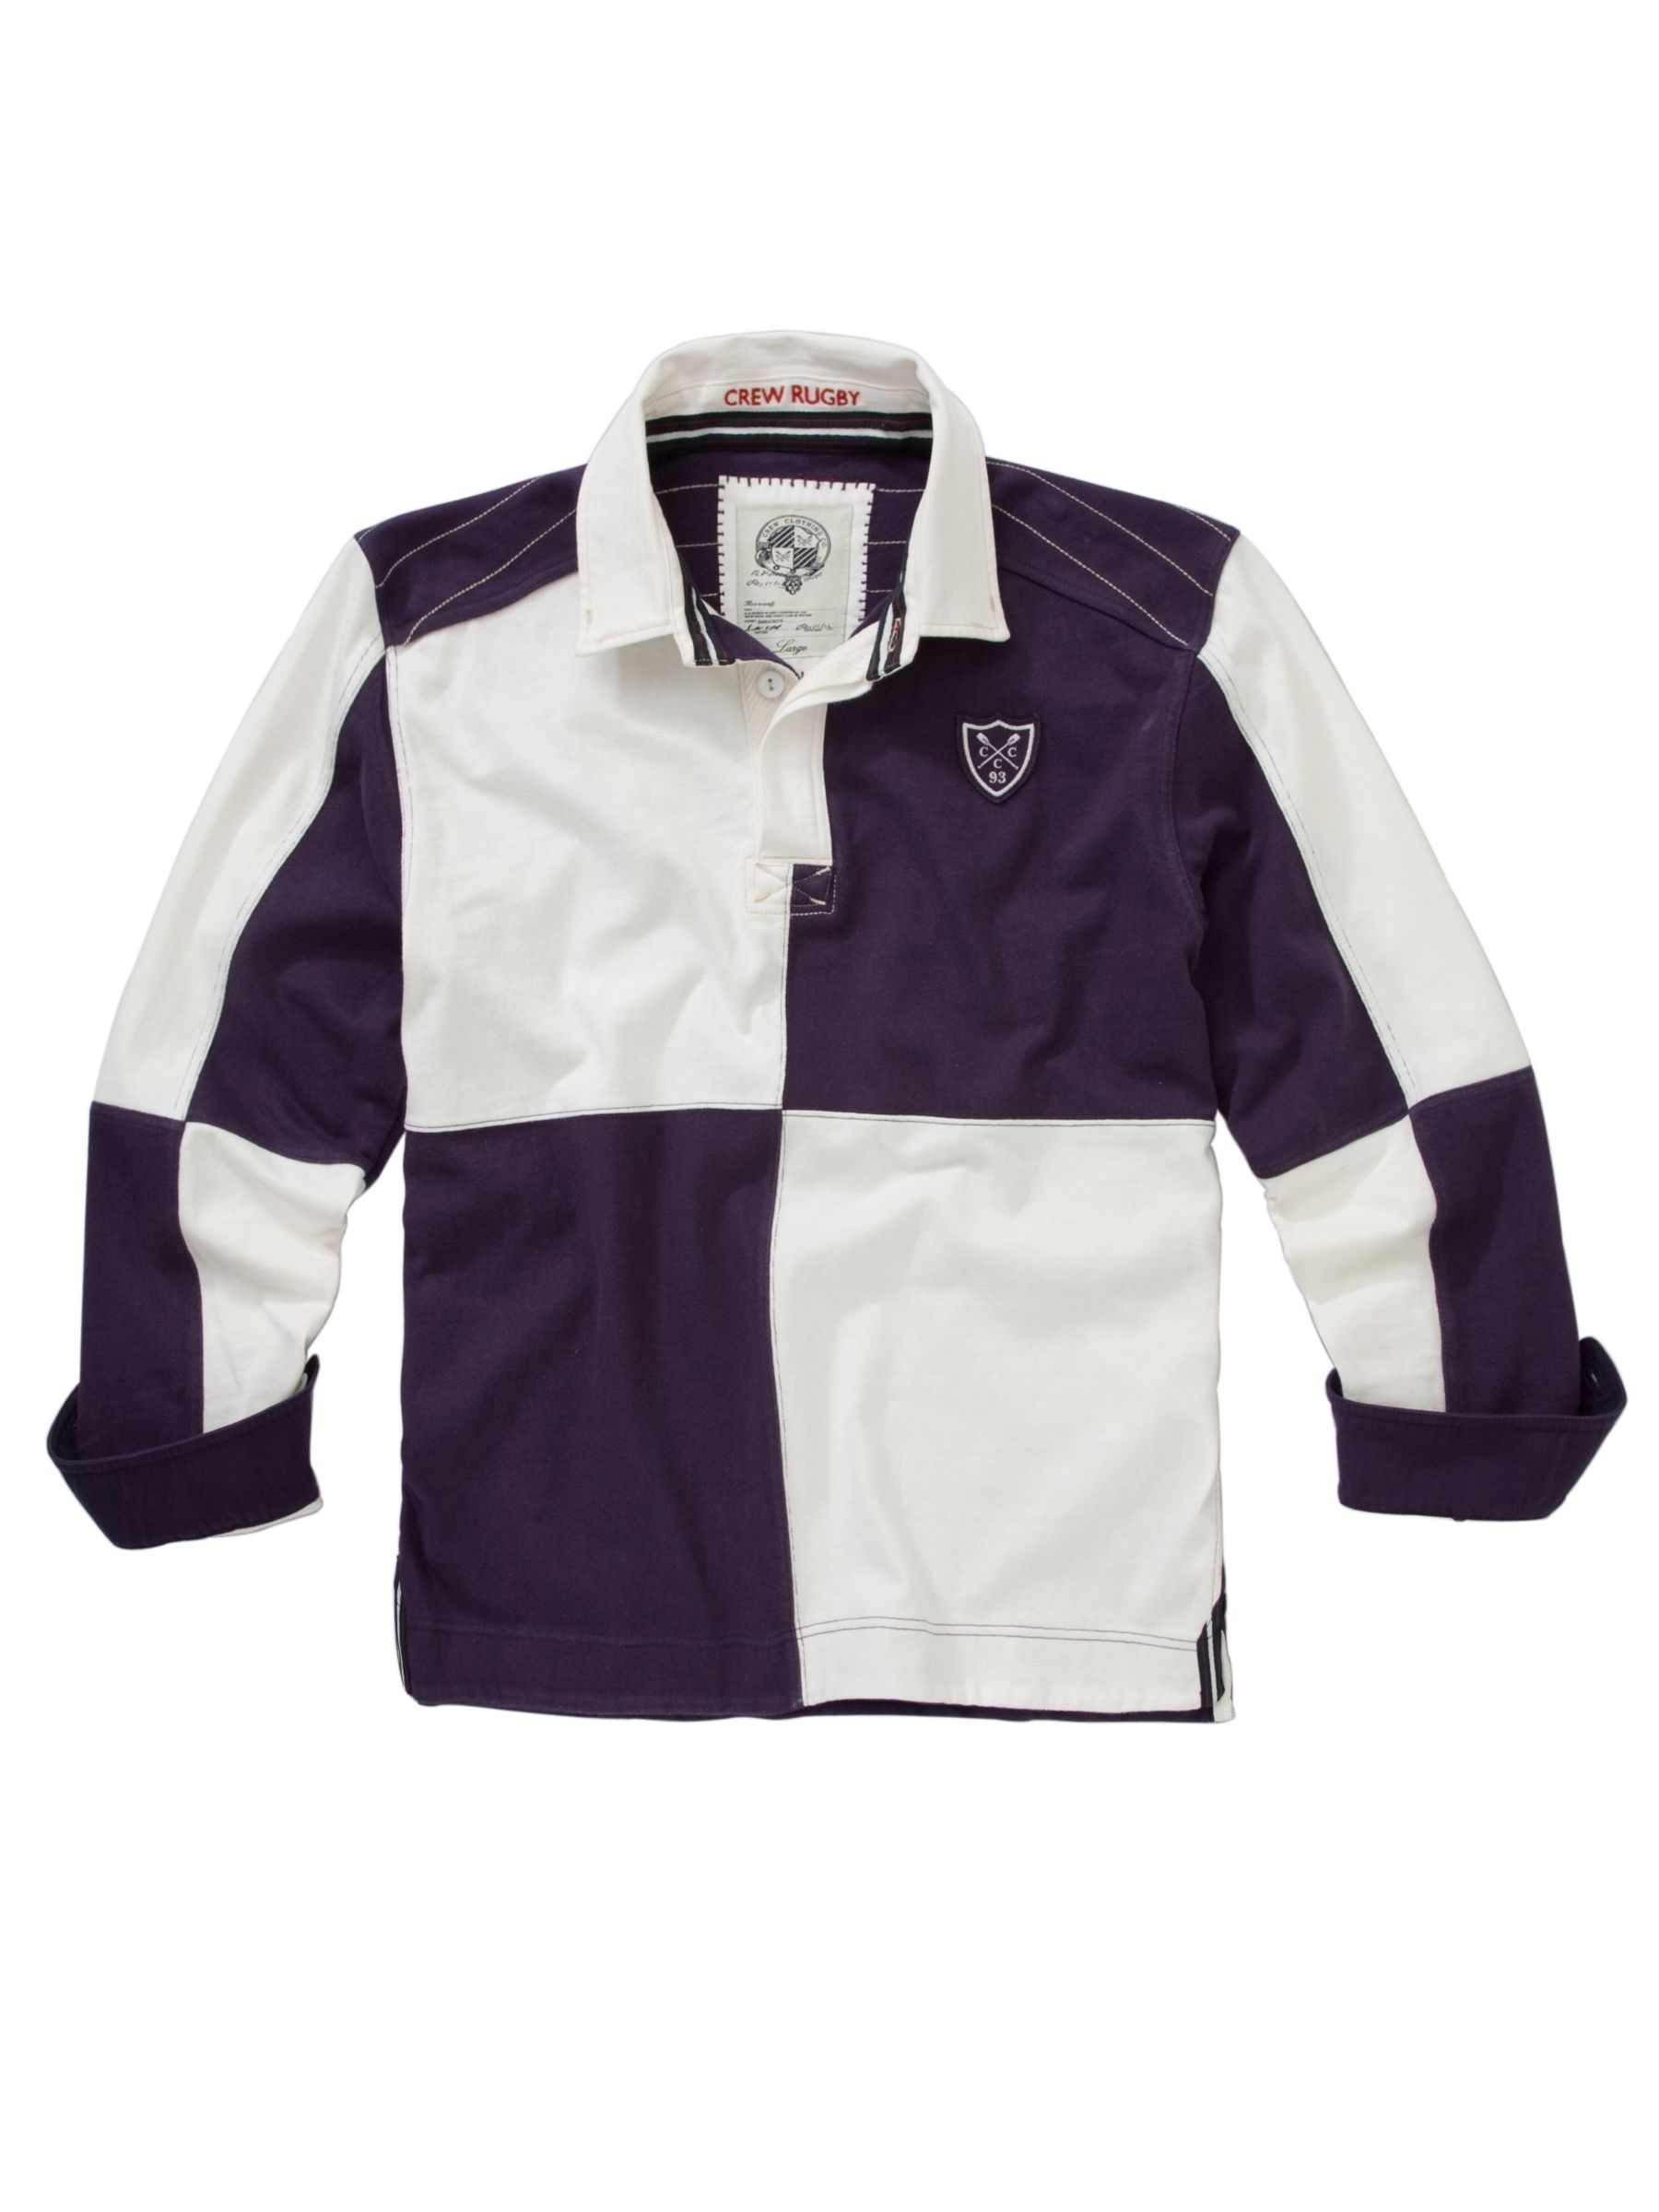 Crew Clothing Harrison Rugby Shirt, White/Navy, L